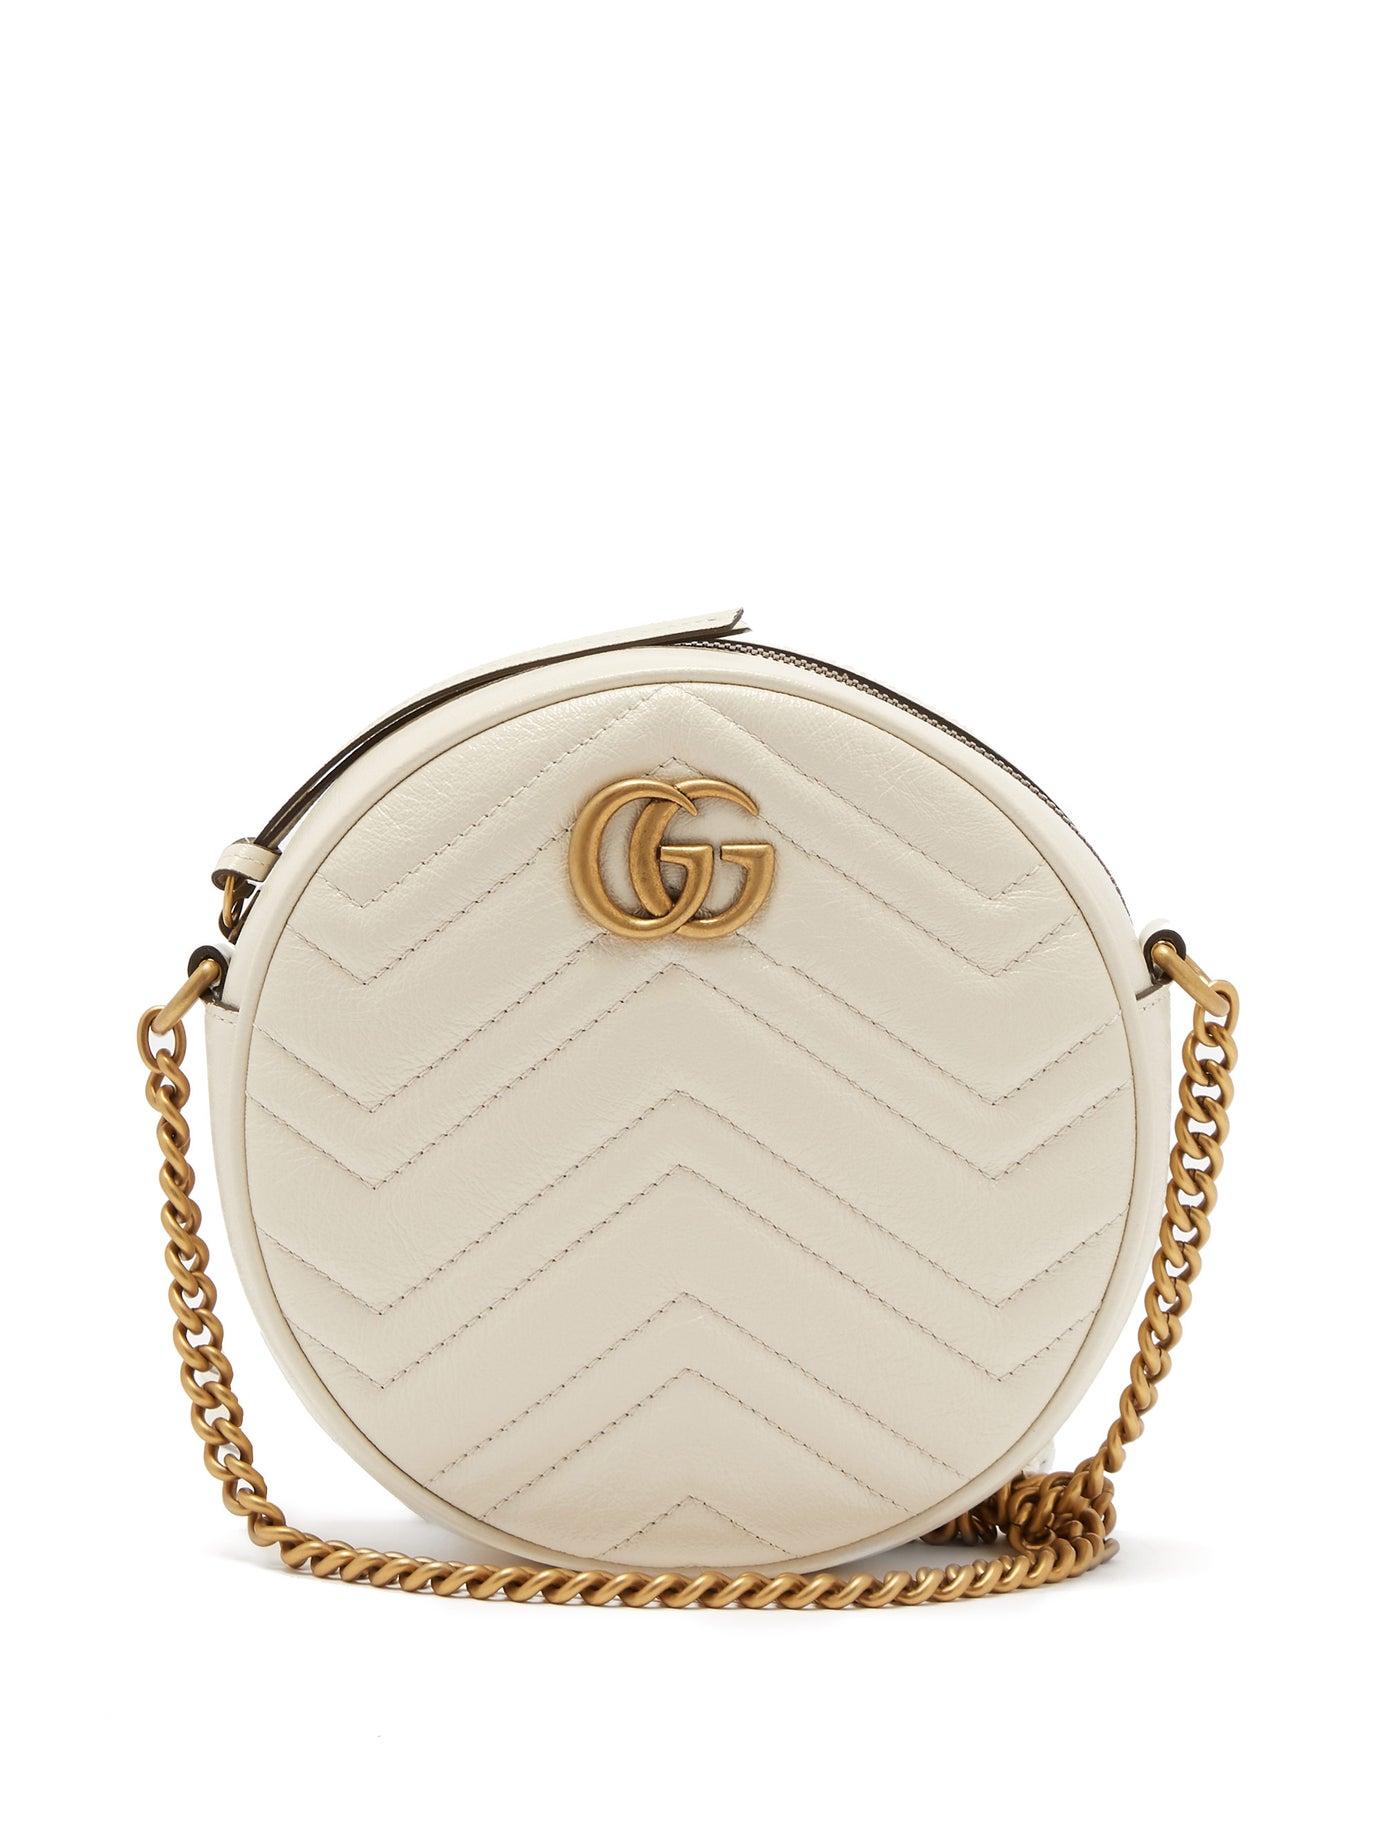 Gucci Gg Marmont Circular Leather Cross Body Bag in White - Lyst